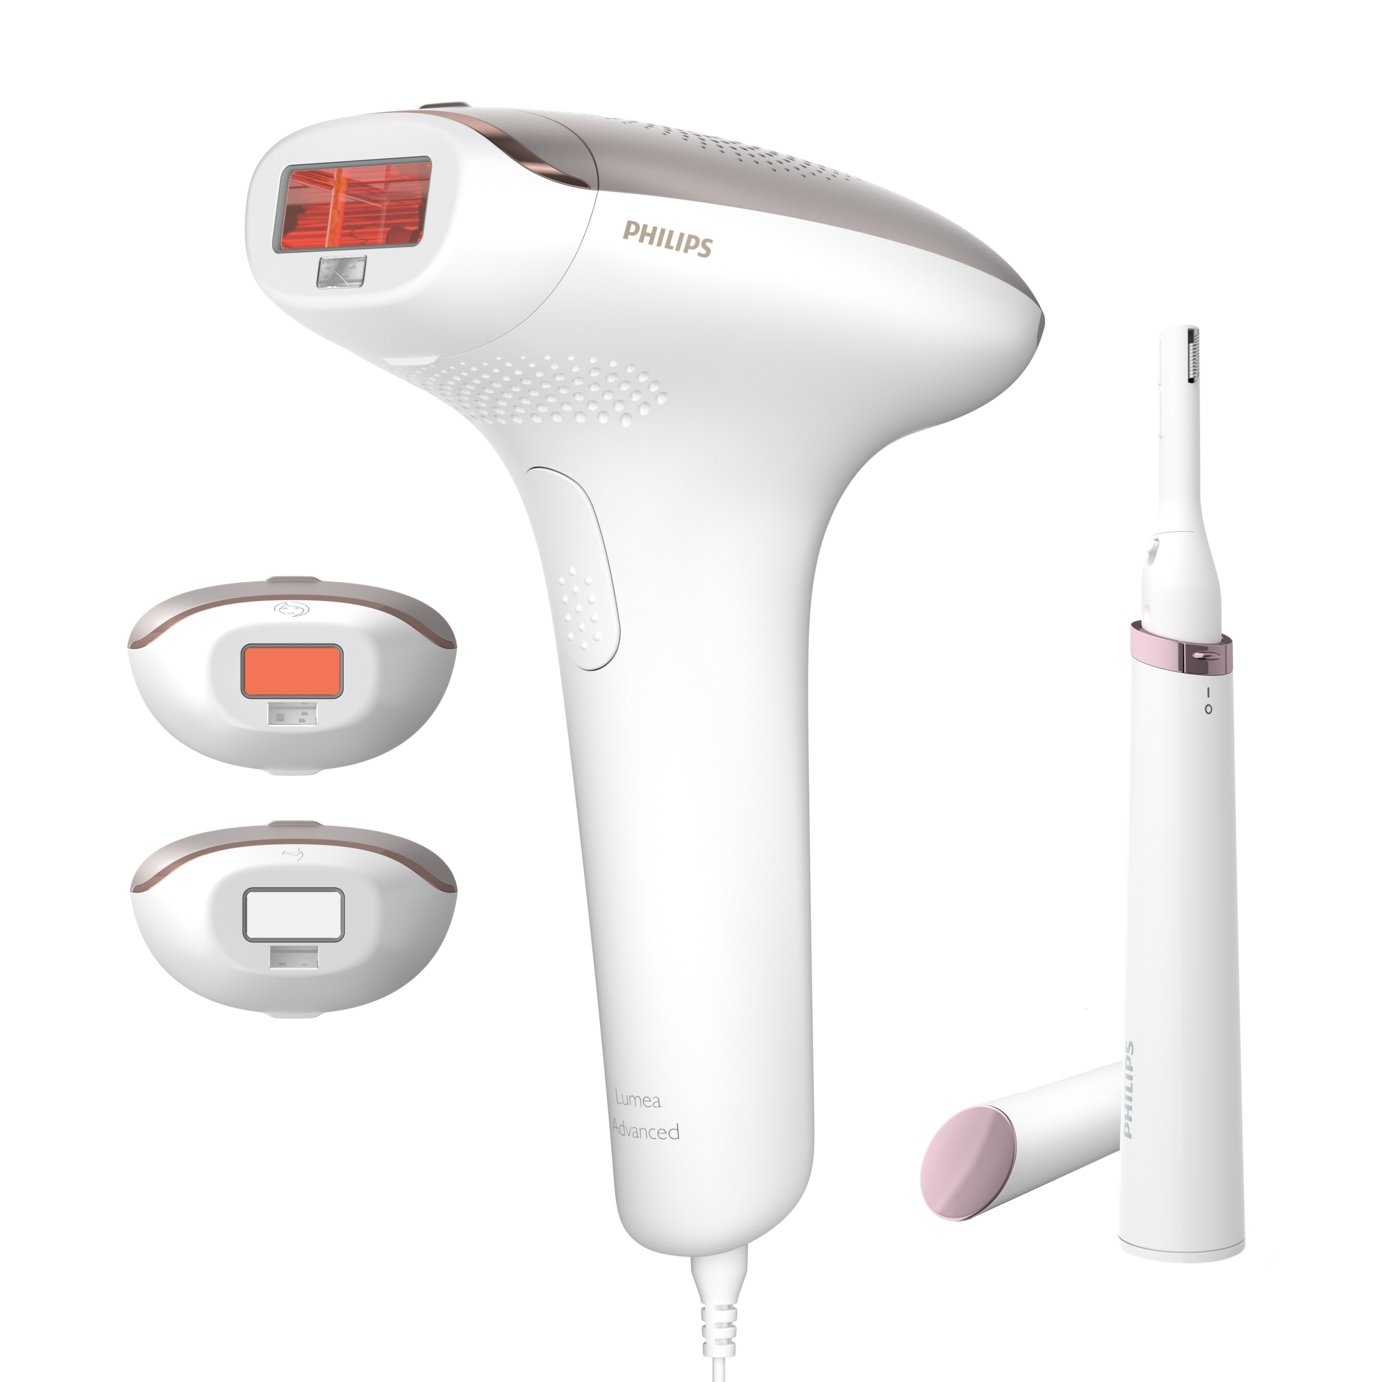 Philips Lumea BRI923 Corded IPL Hair Removal Device review